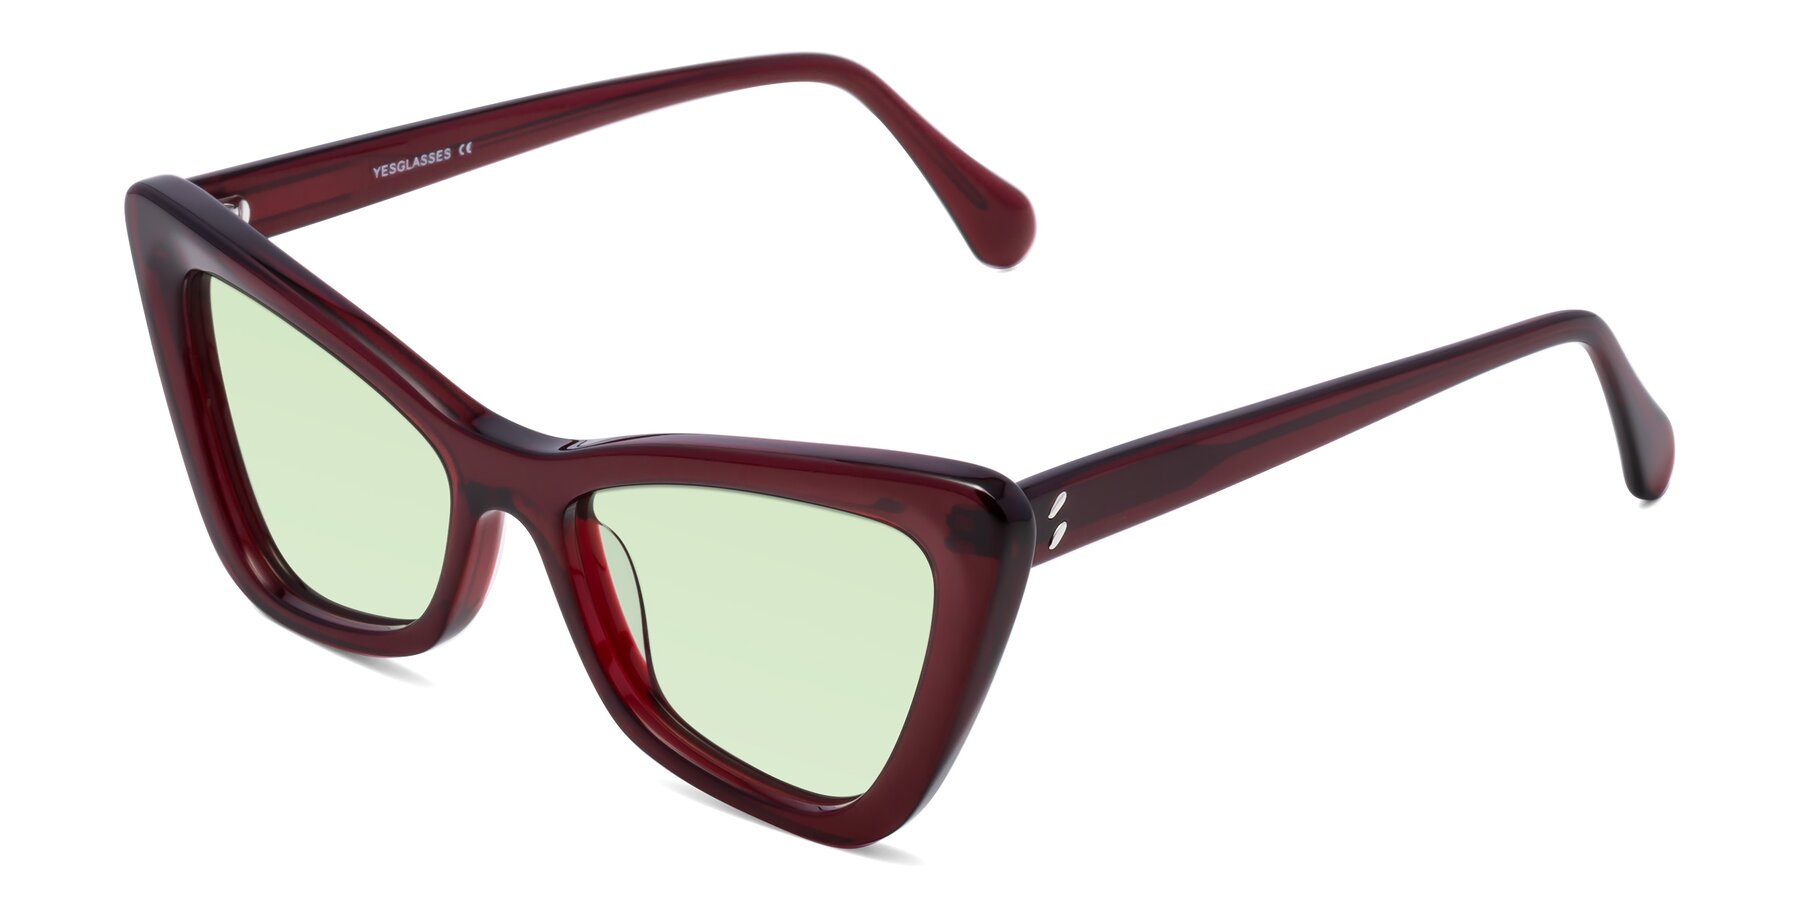 Angle of Rua in Wine with Light Green Tinted Lenses